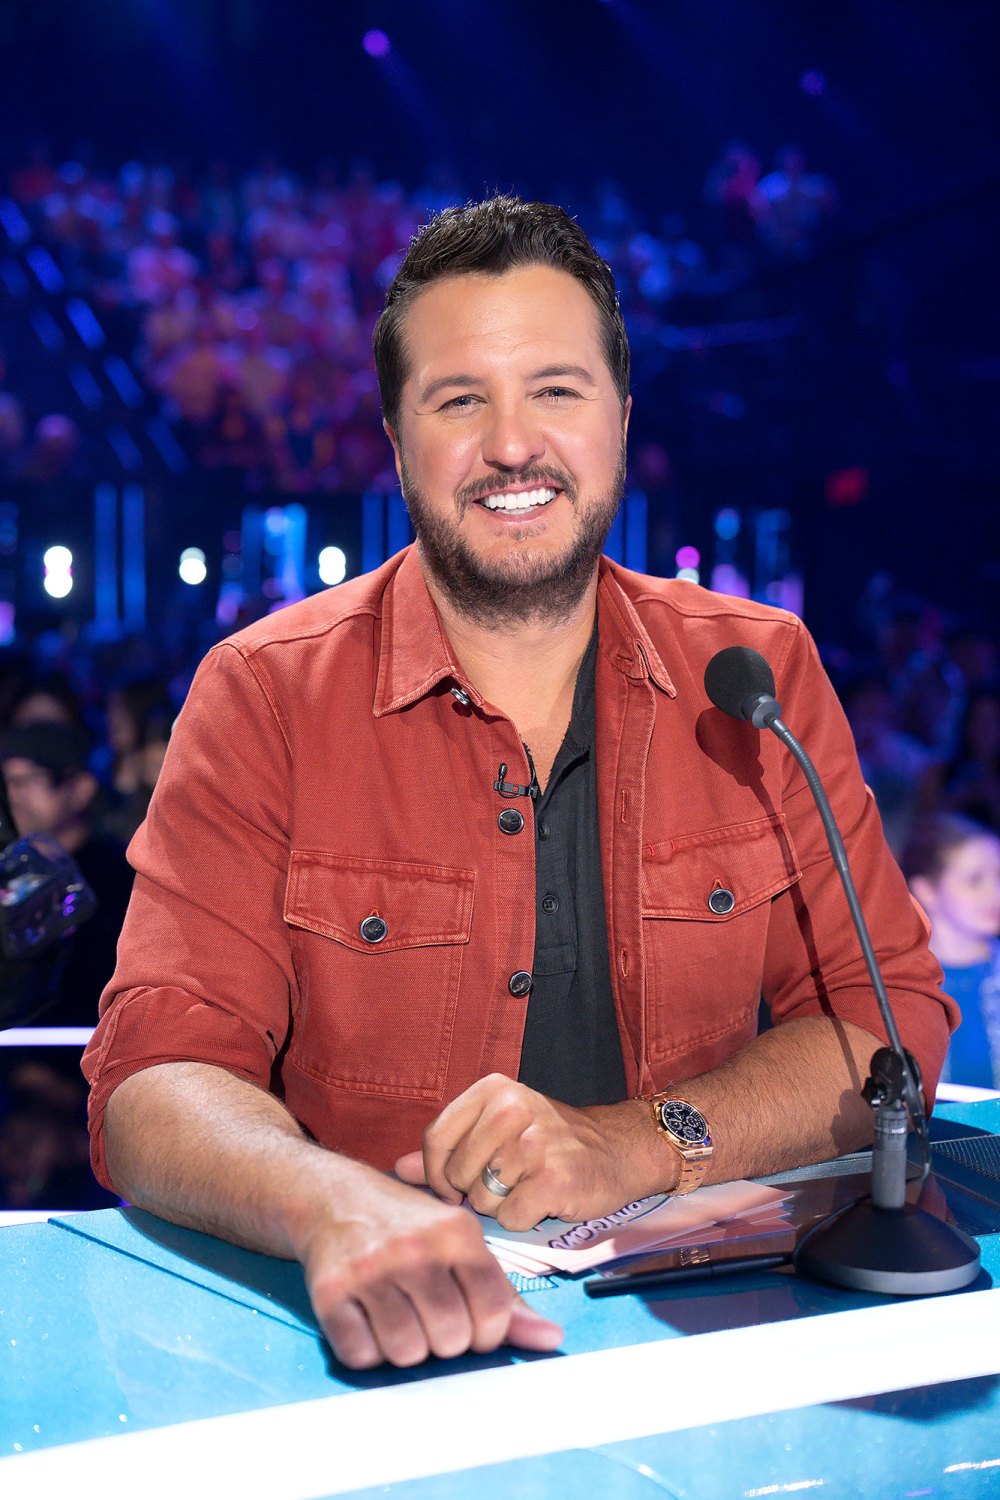 Luke Bryan Is Asked on American Idol About His Concert Fall